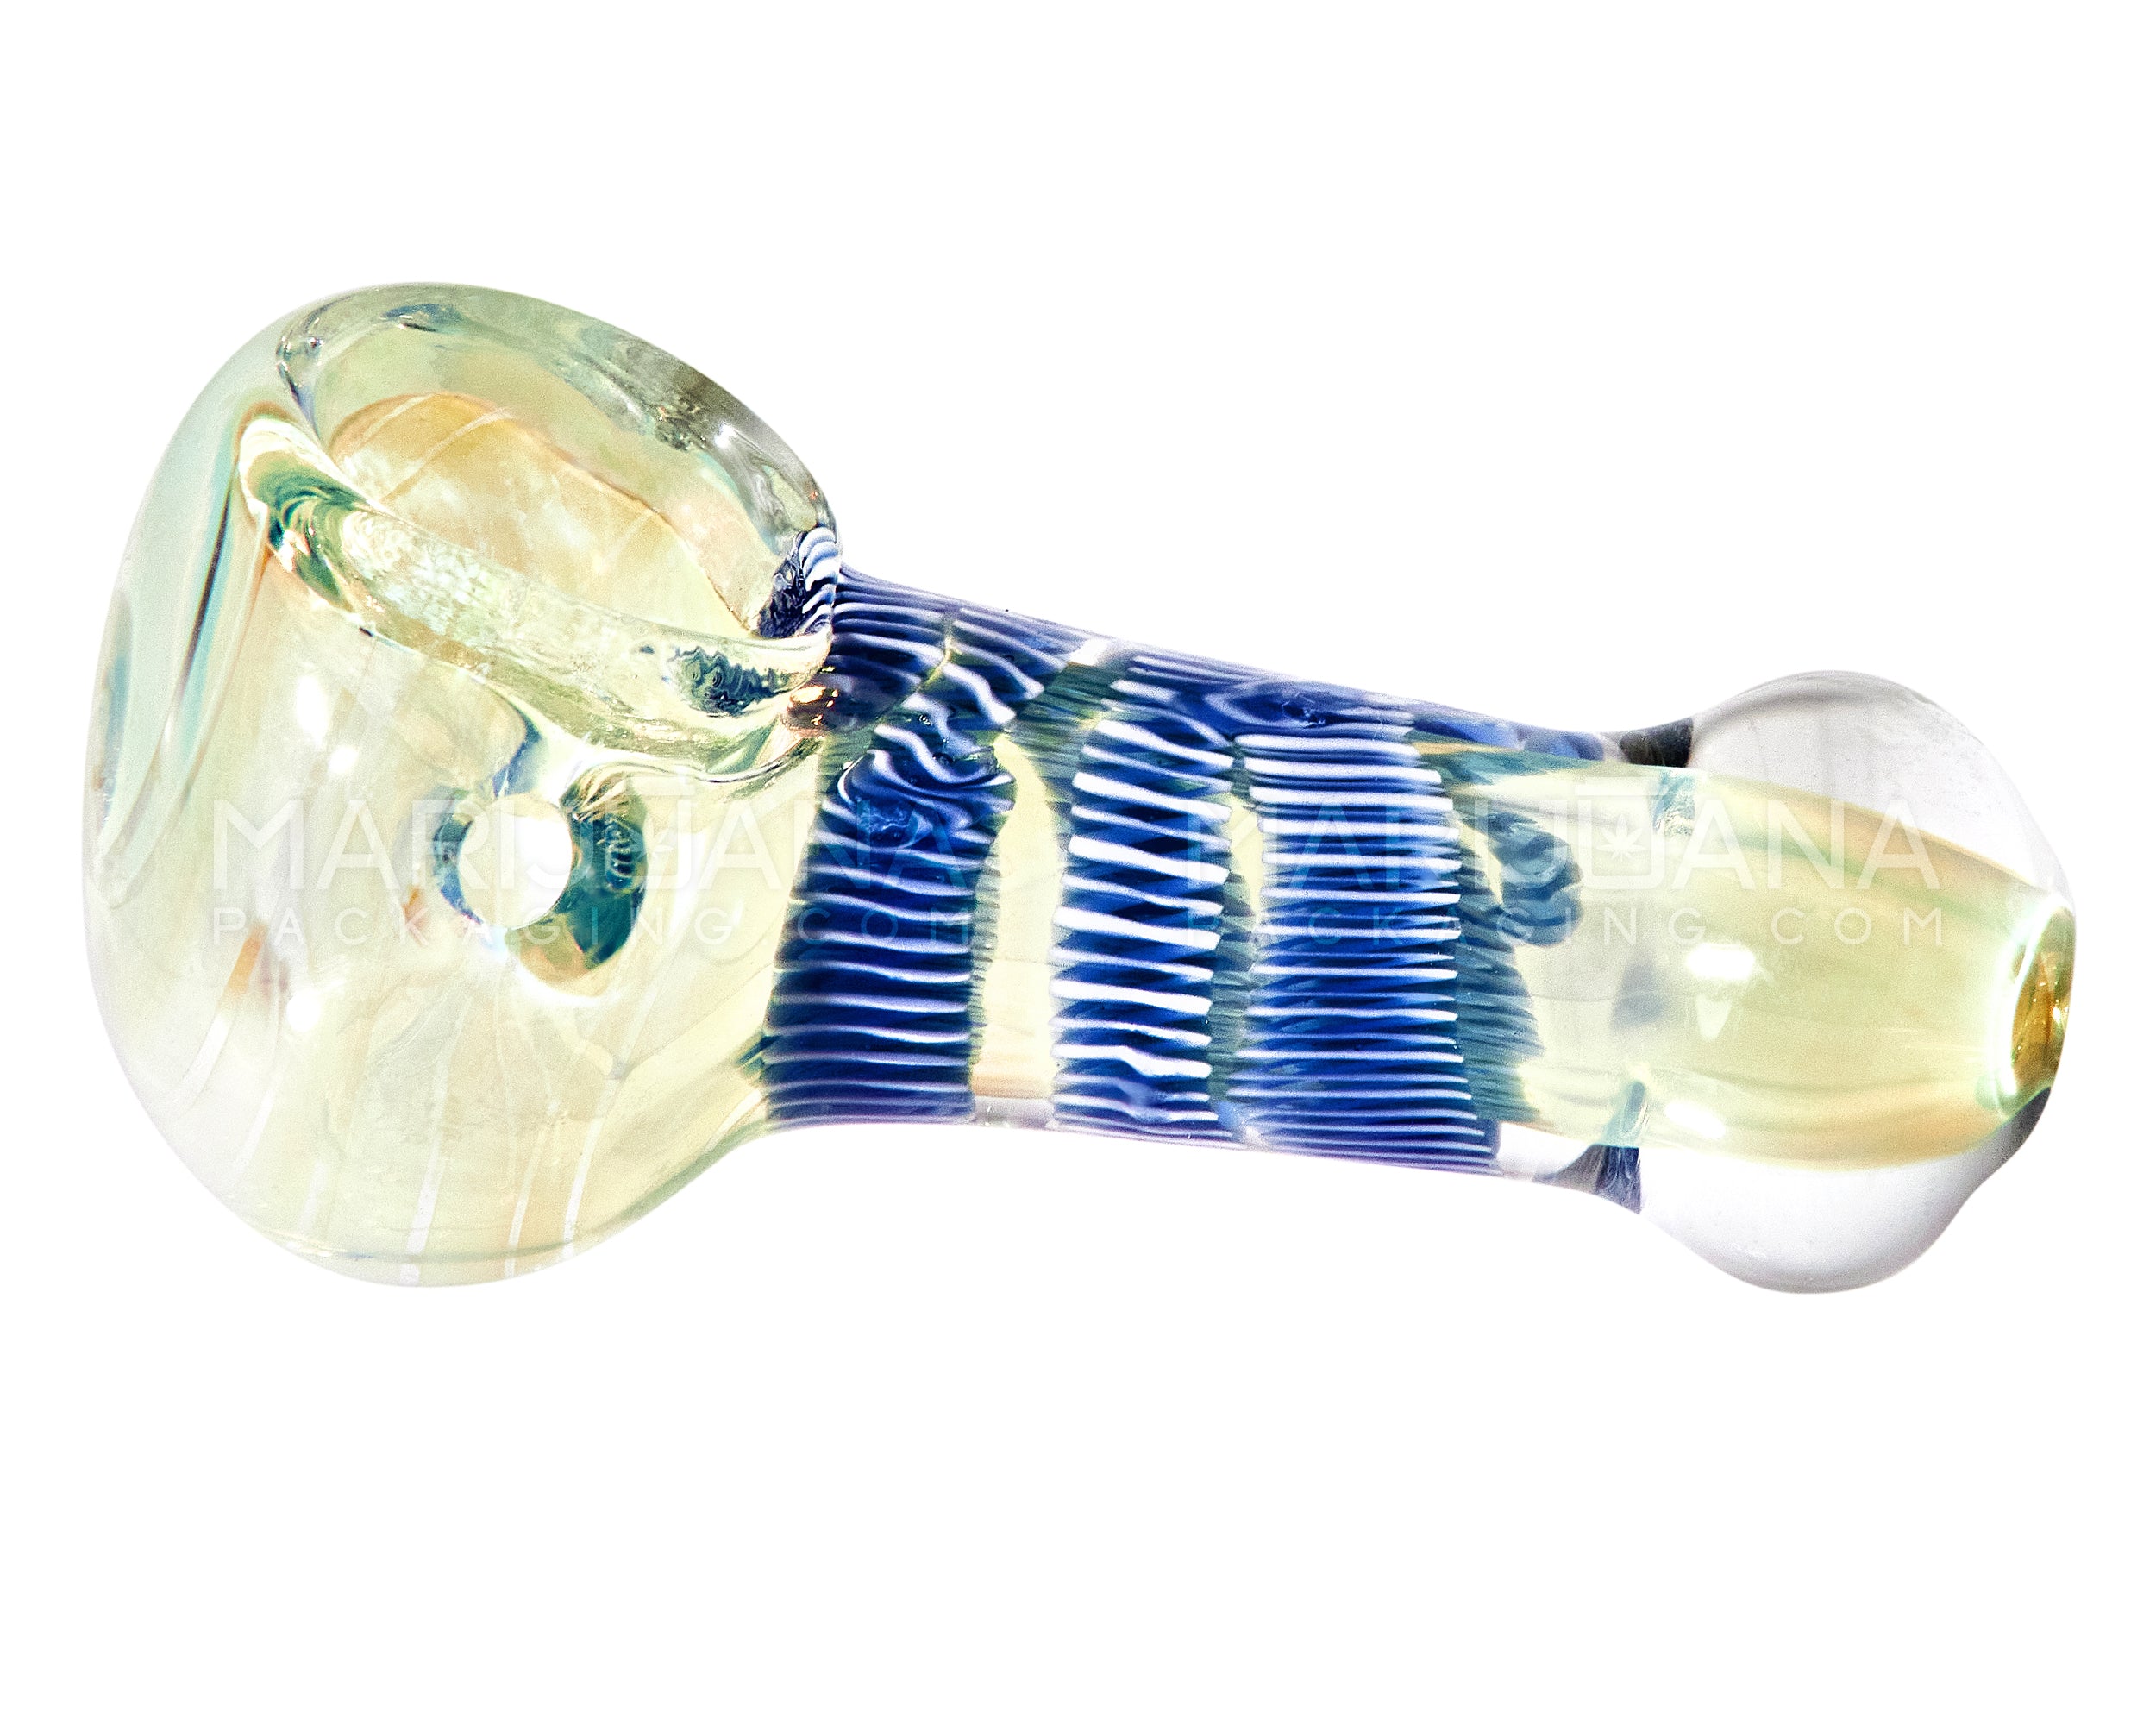 Double Blown | Raked & Gold Fumed Spoon Hand Pipe w/ Ribboning | 3in Long - Glass - Assorted - 4